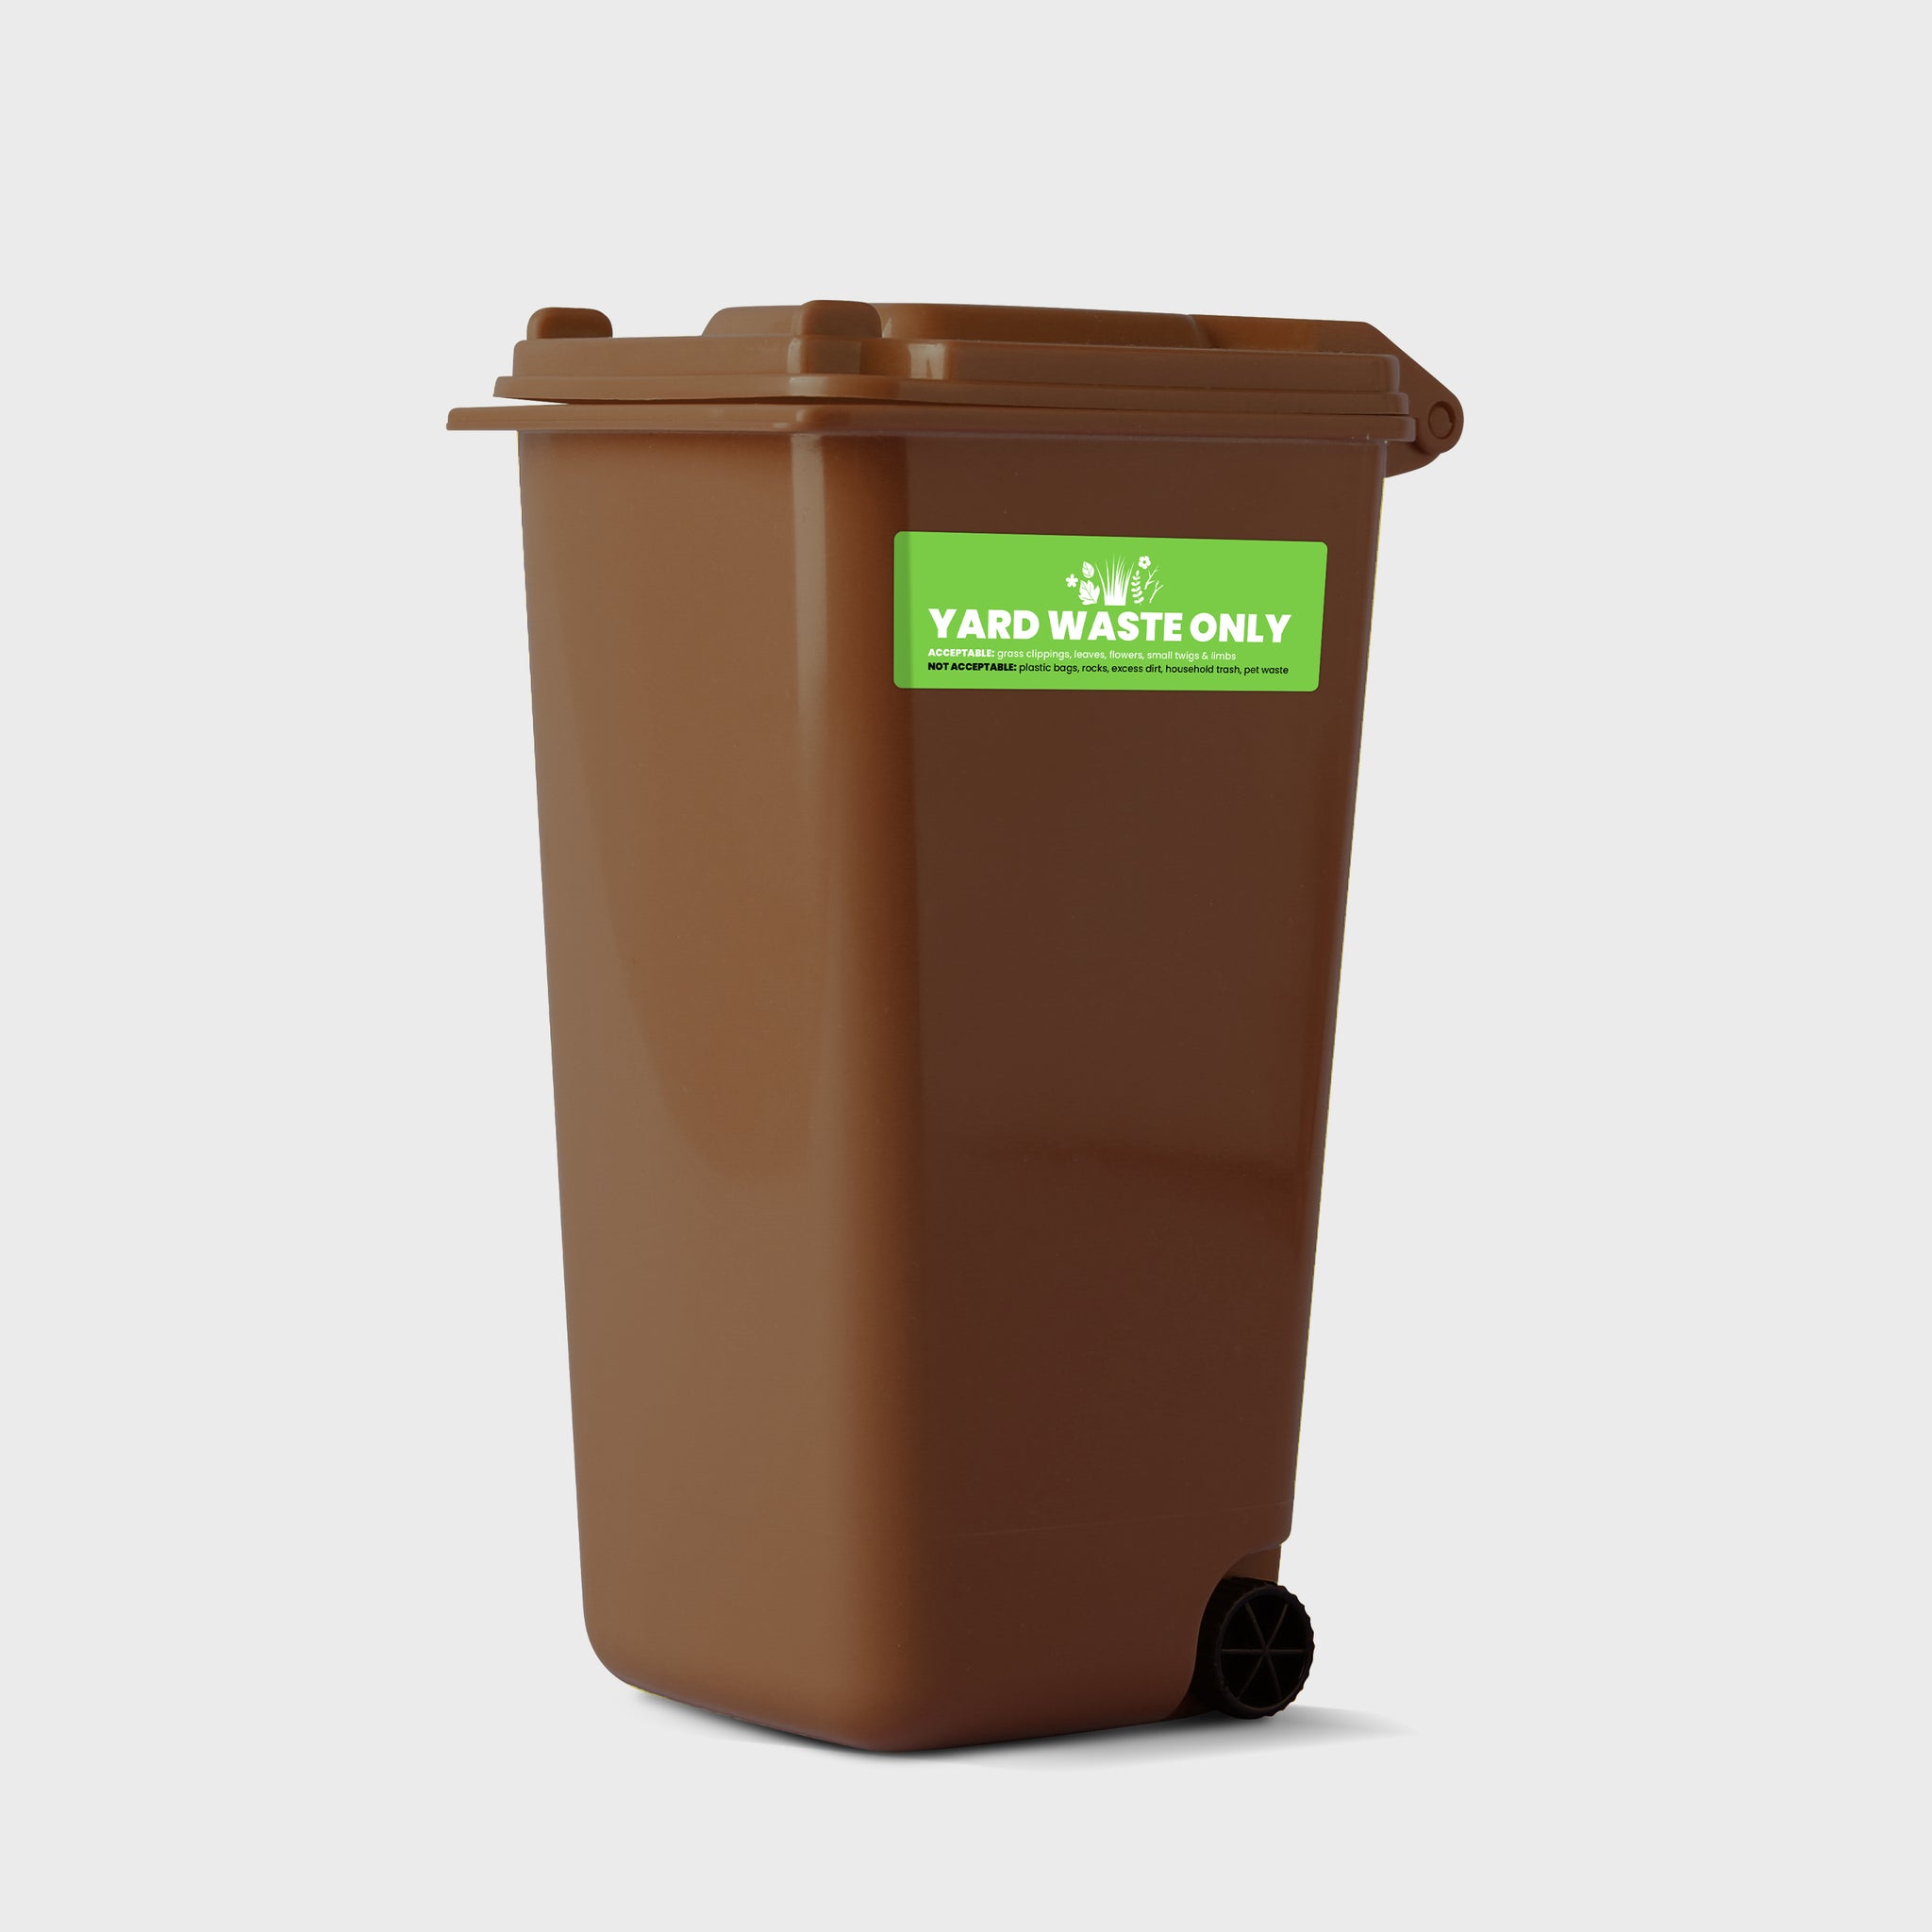 Yard Waste Stickers - Trash Bin Labels with Helpful Do & Don't Reminders | 4 Pack